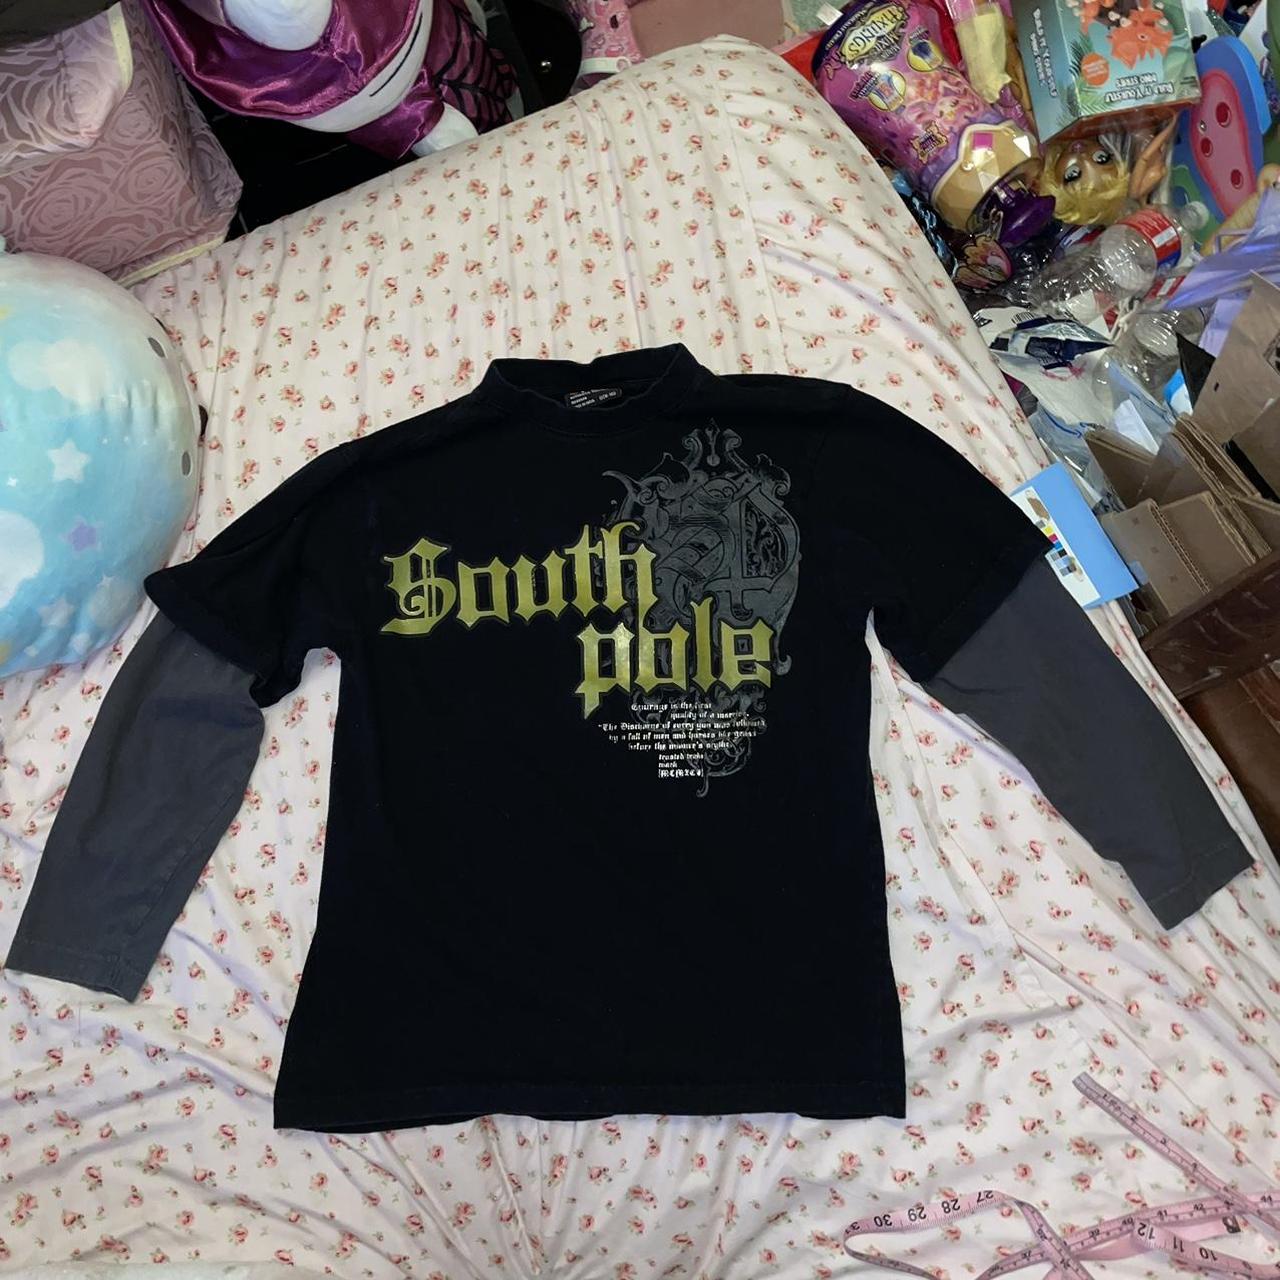 South Pole black tee with grey and gold green text